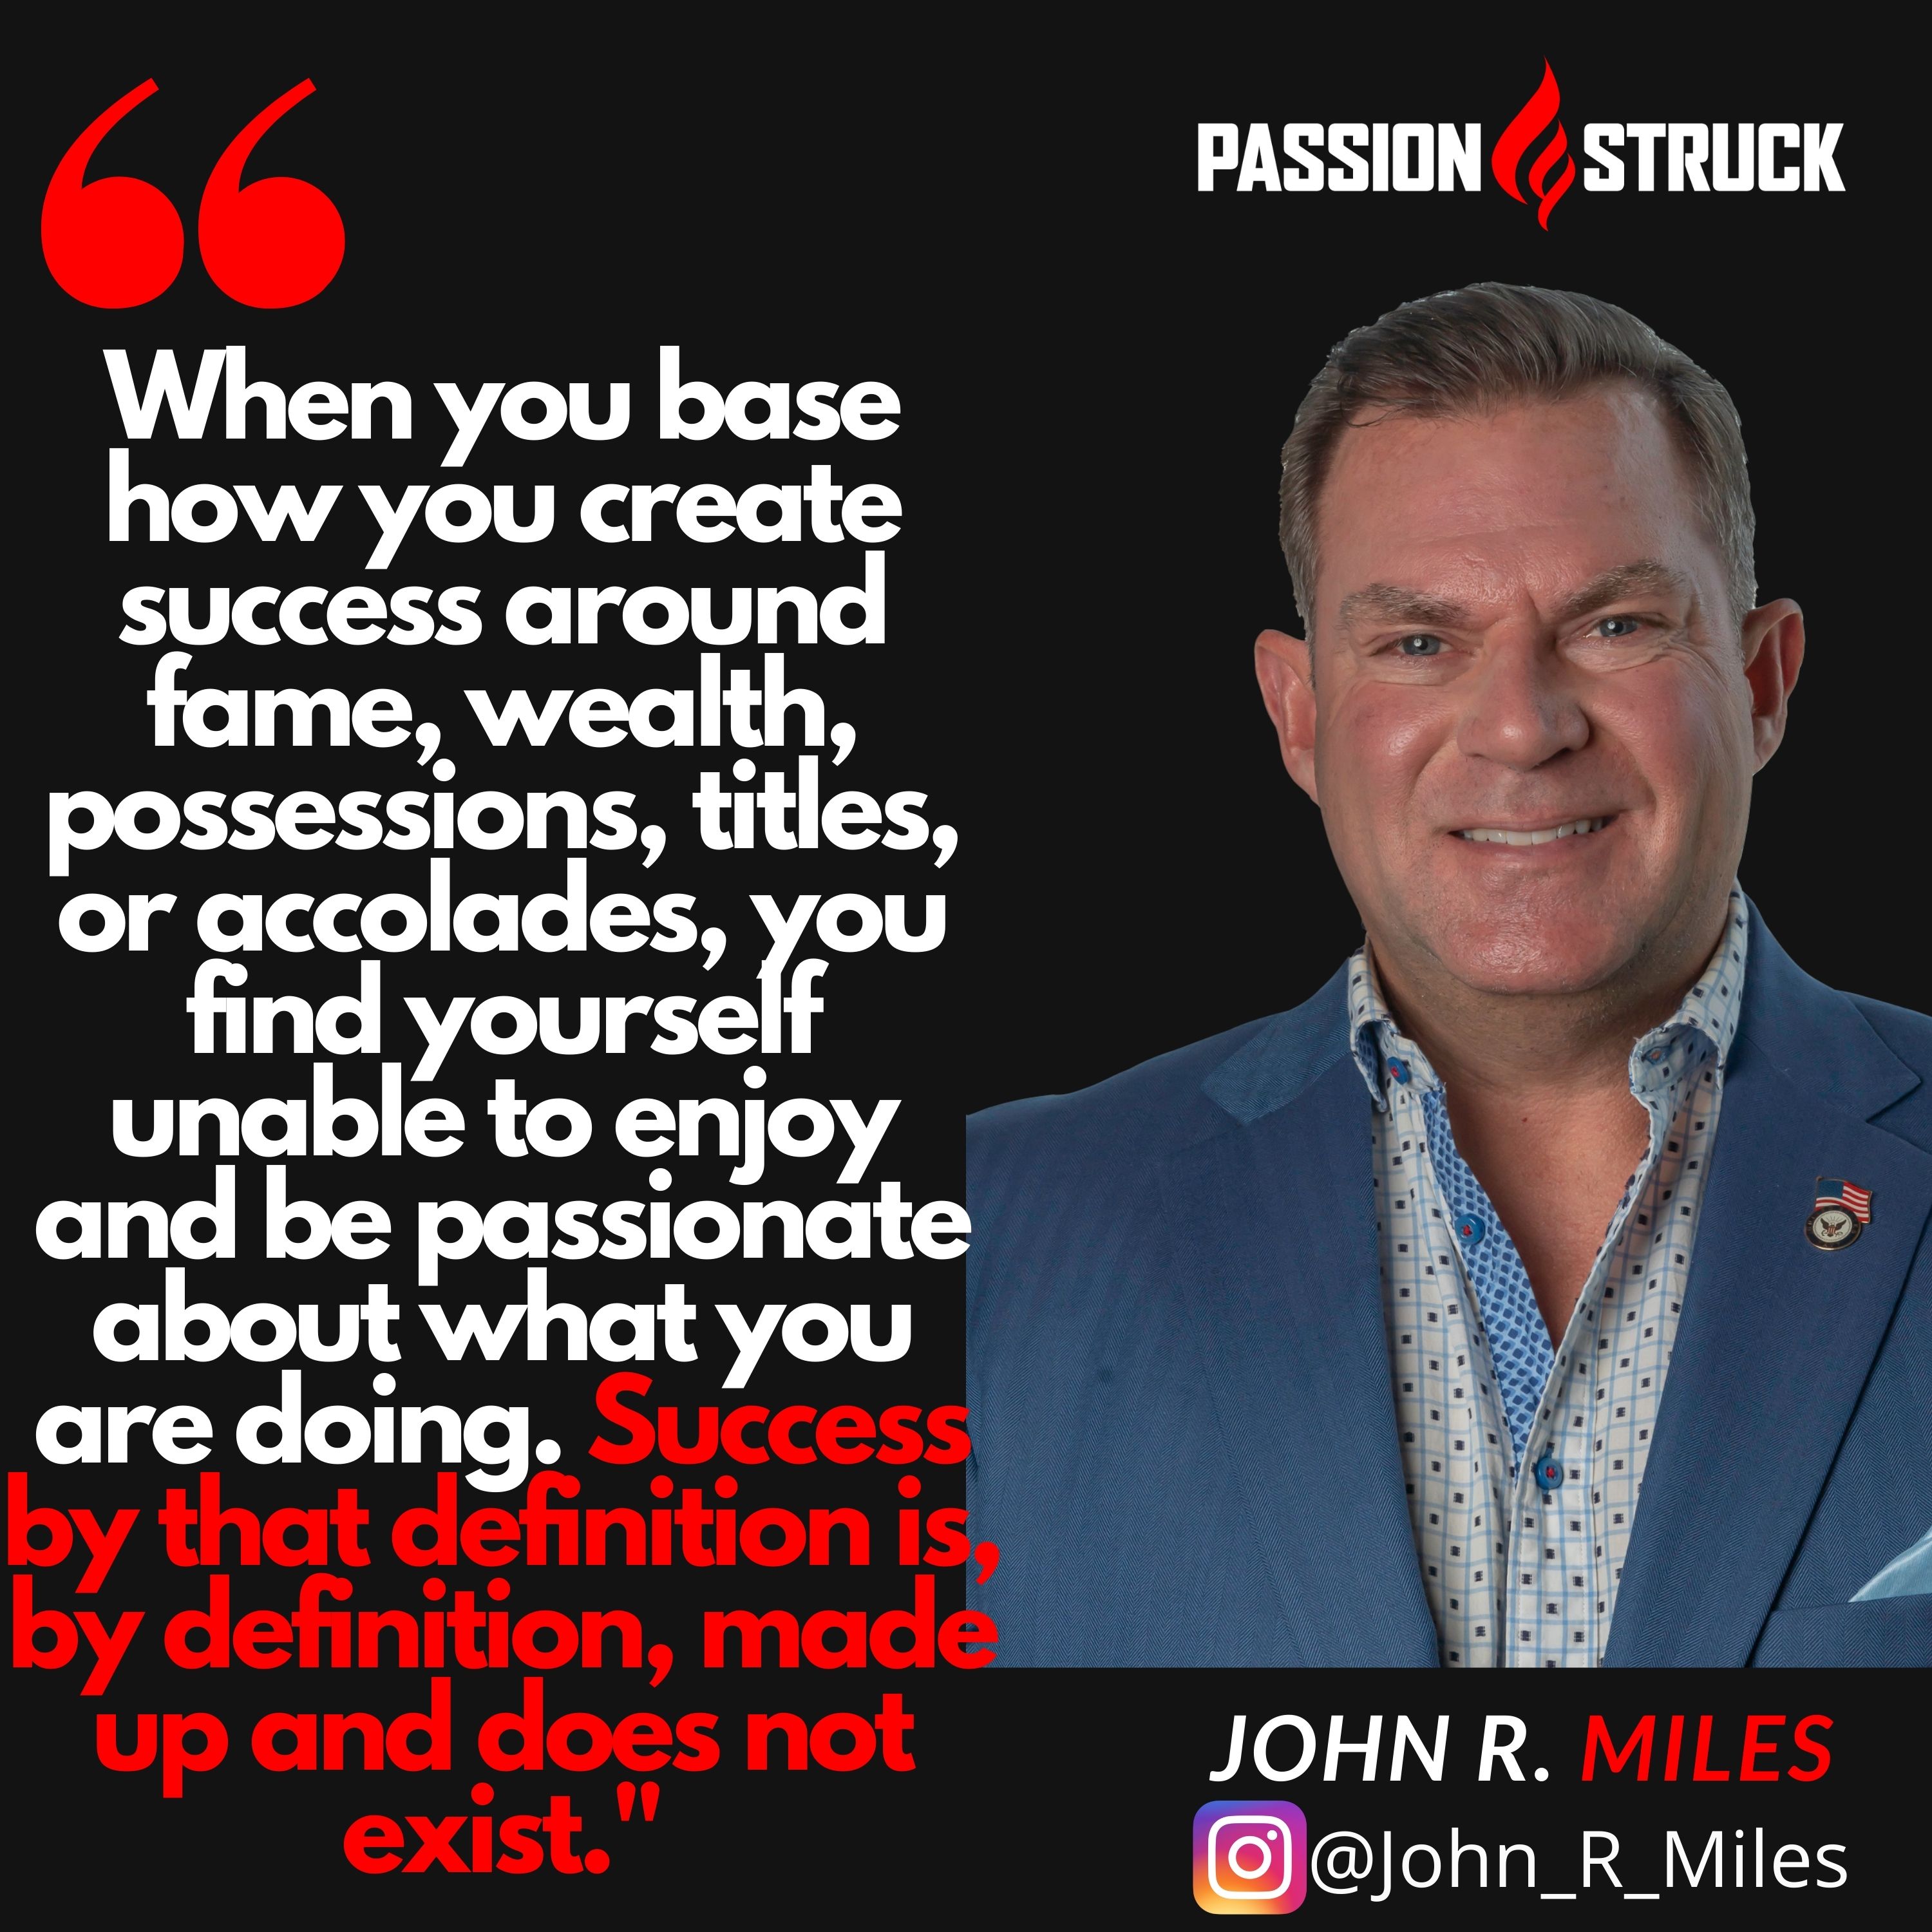 Quote by John R. Miles on how to create true success